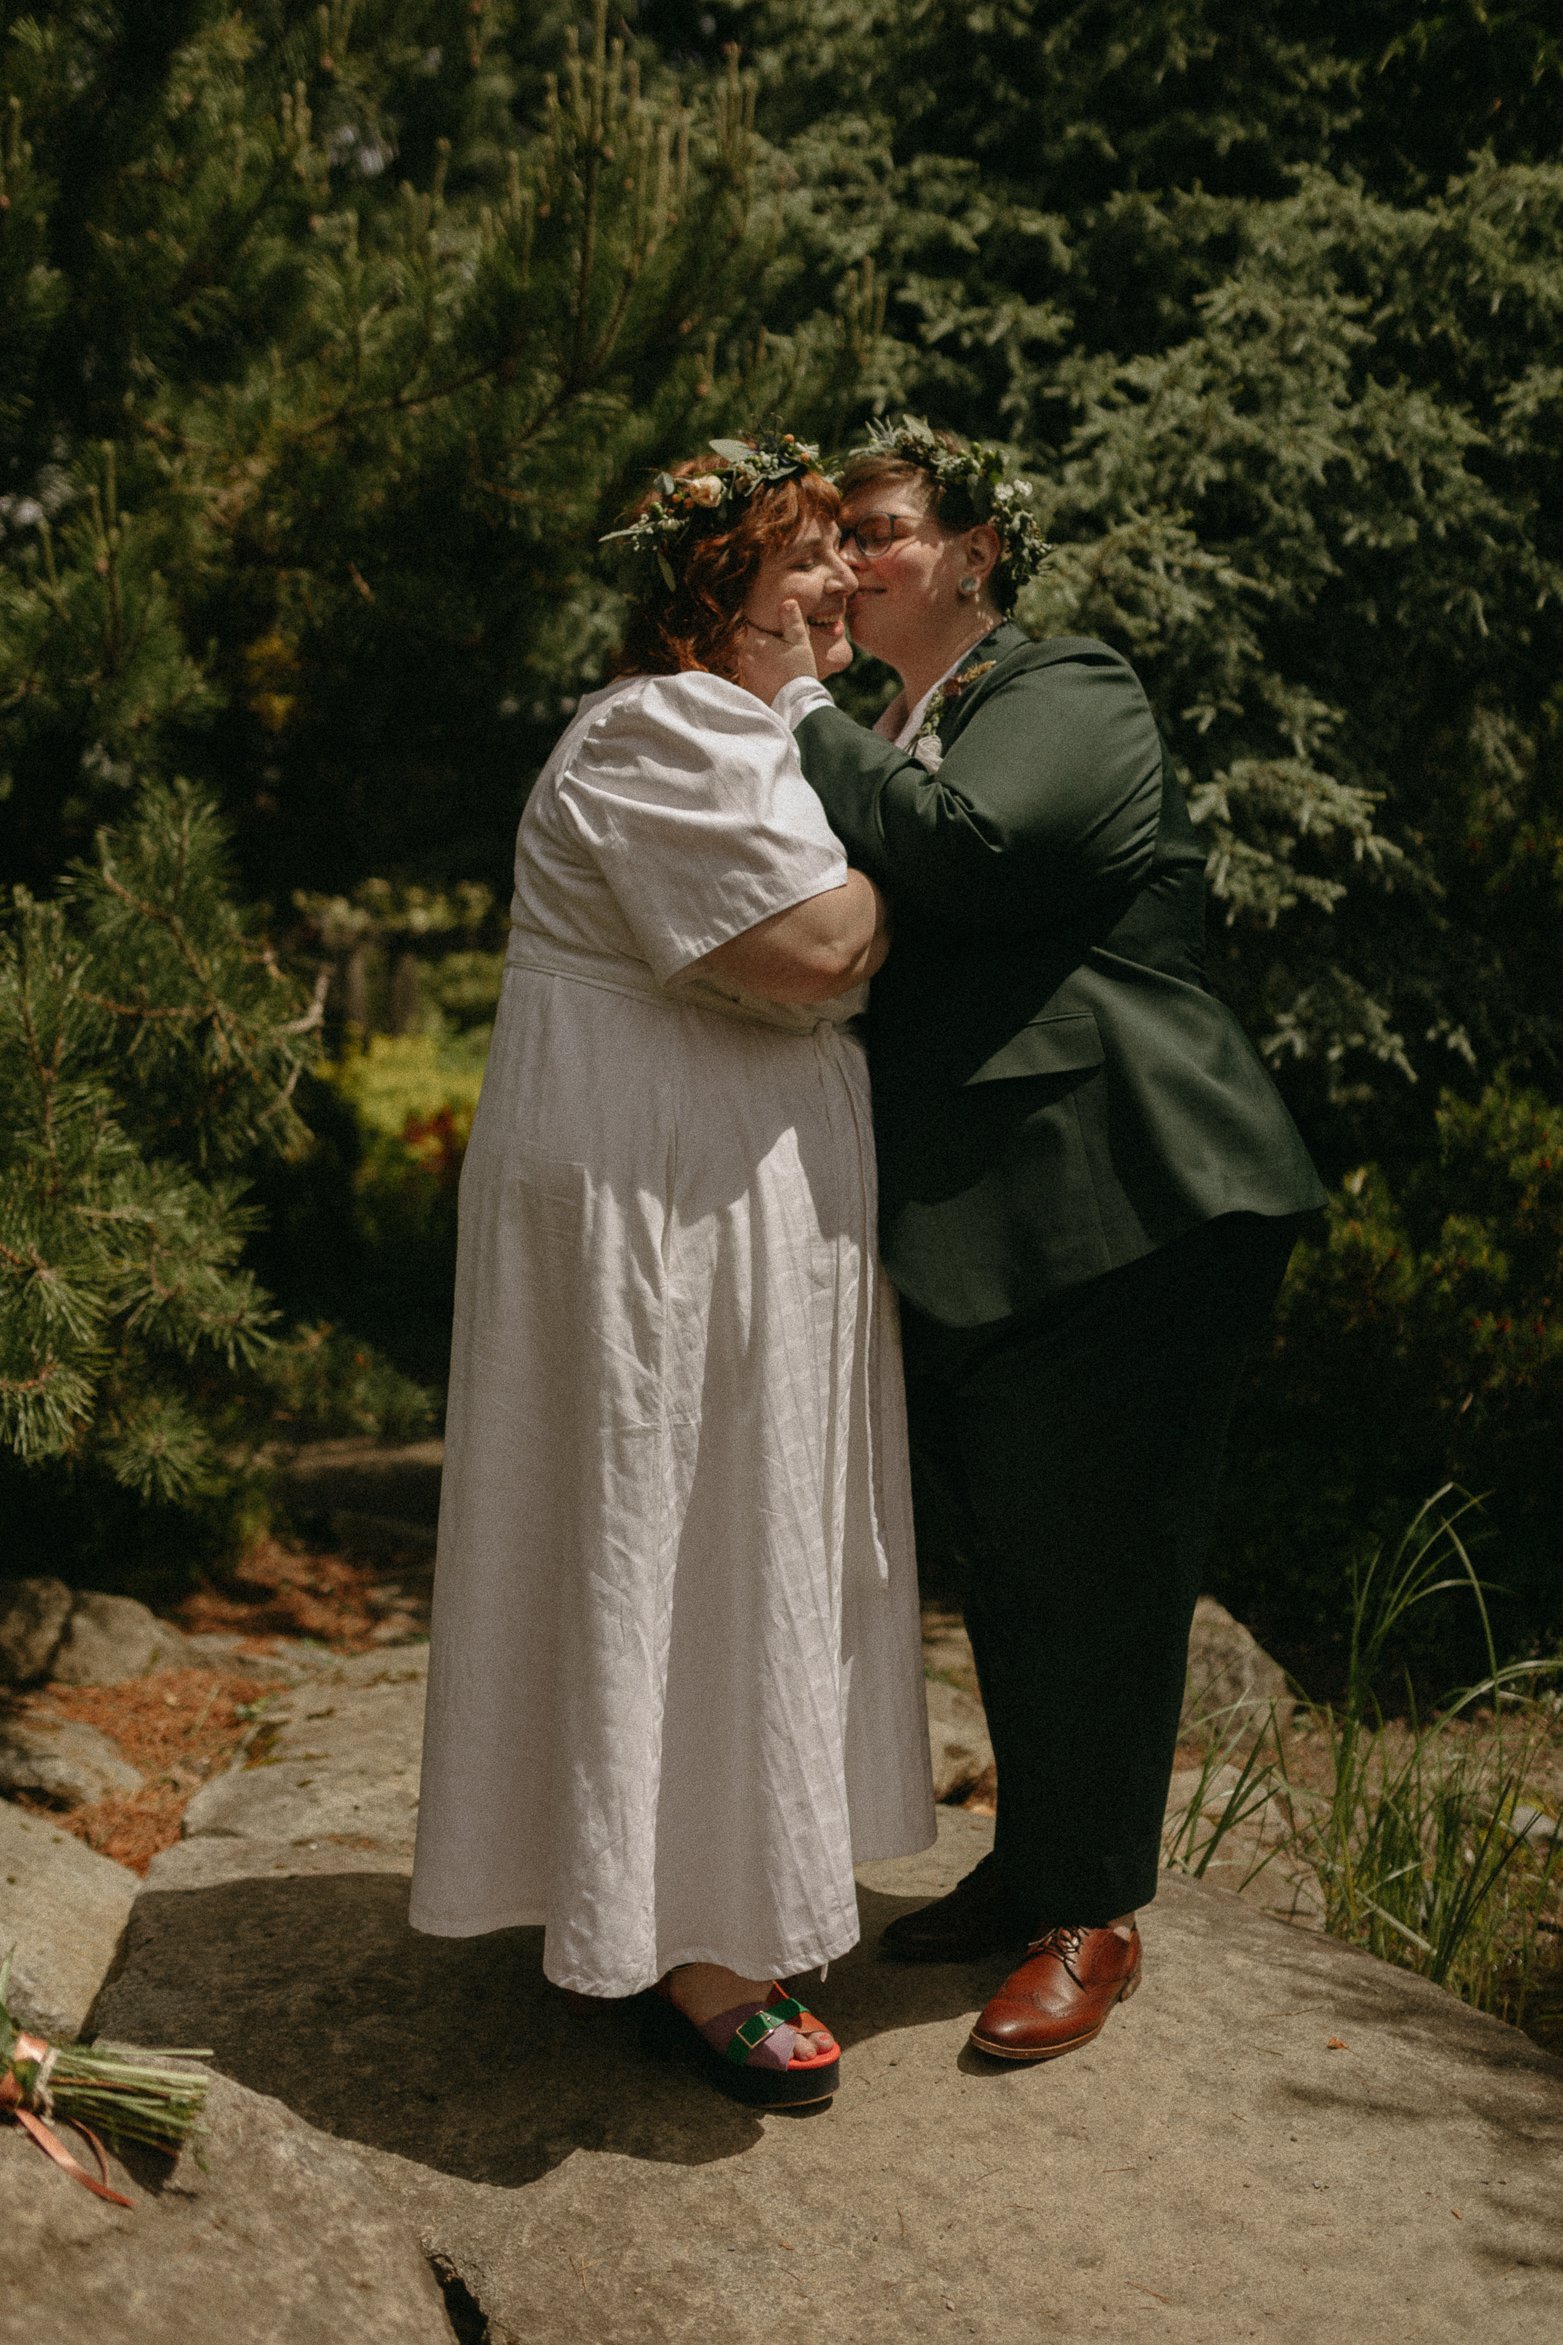 sunsoaked-queer-seattle-washington-arboretum-rose-garden-lqbtq-wedding-by-genderqueer-tacoma-elopement-photographer-halle-roland-photography-28.jpg